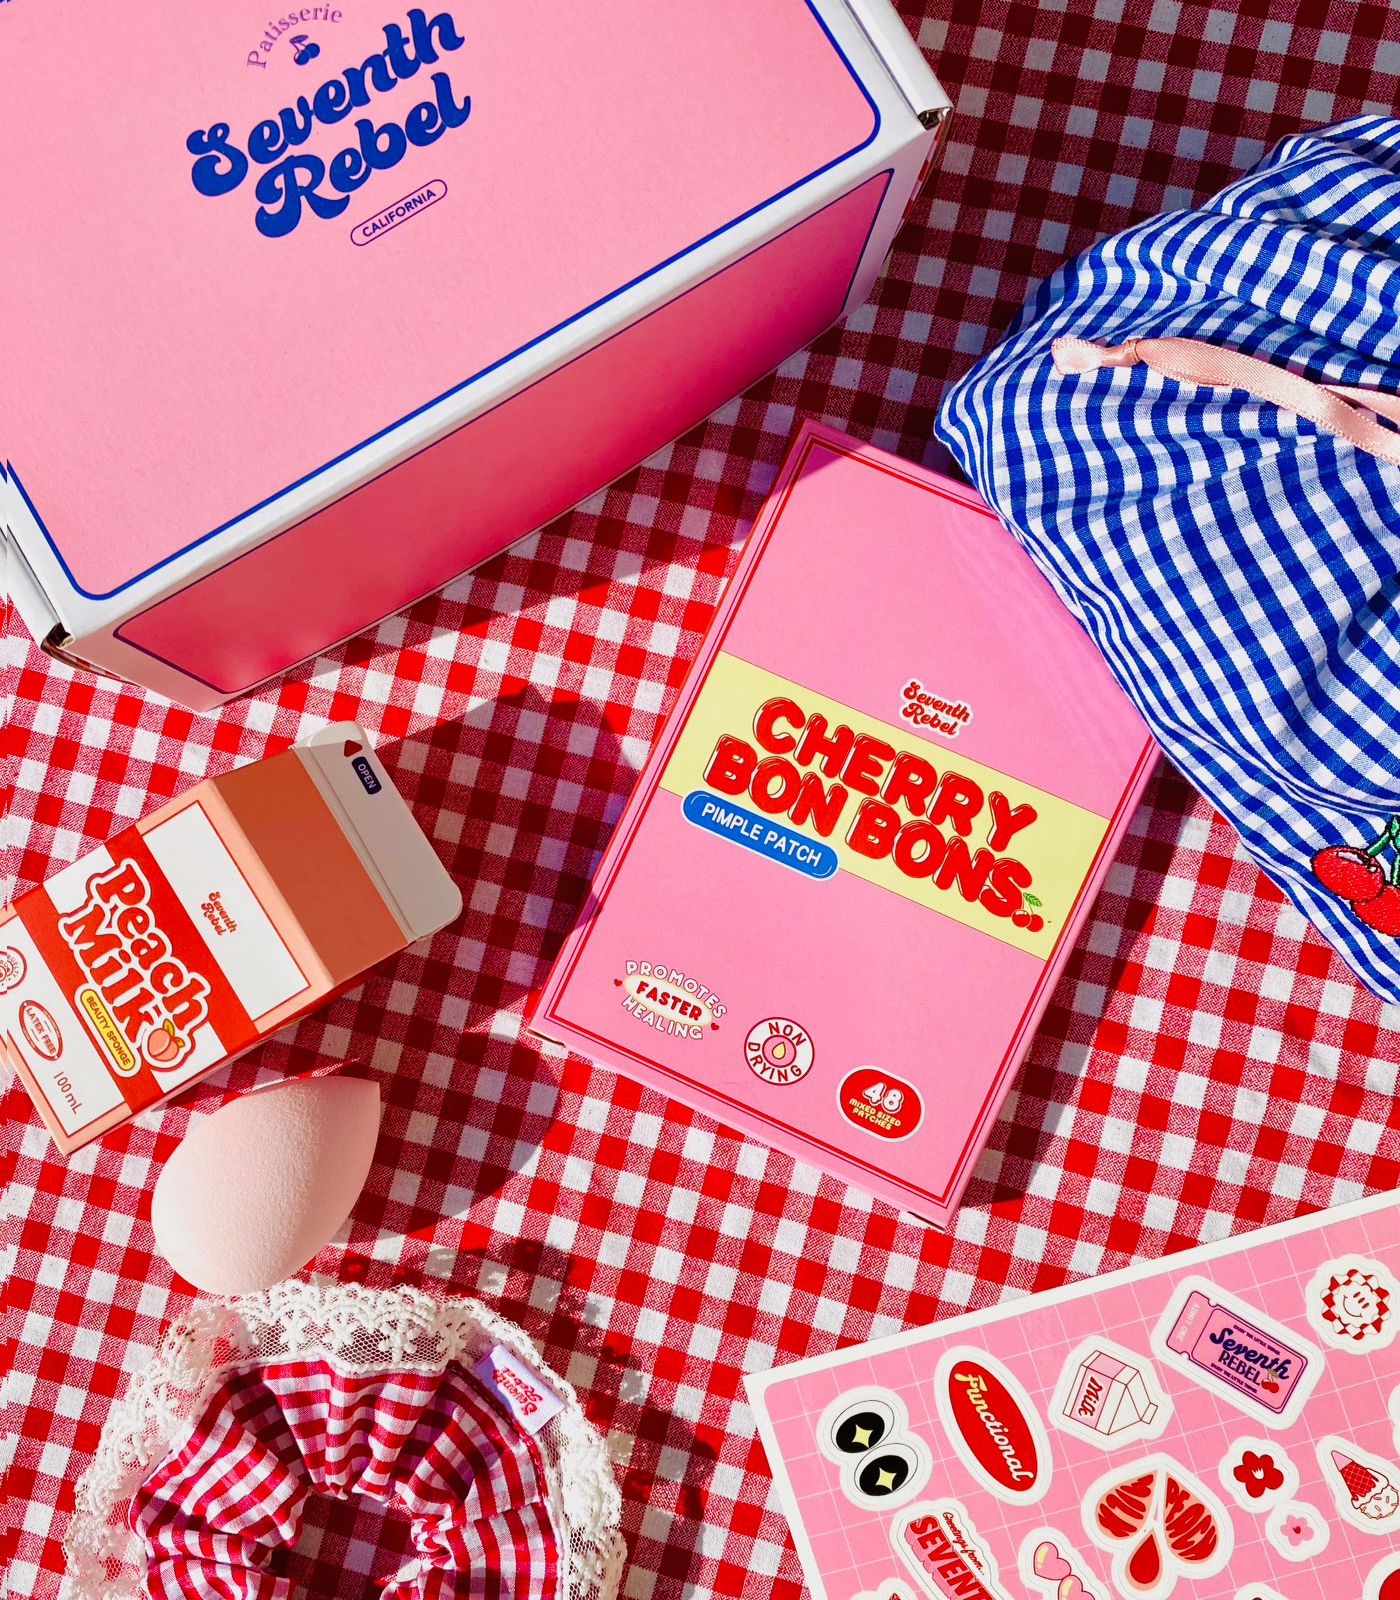 SEVENTH REBEL Picnic Set - Cherry Bon Bons Original Pimple Patch - Invisible Hydrocolloid Acne Patches for Spot Treatment, Covering Blemishes and Zits - For Face and All Skin Types, Non Drying, Fast Healing, Not Tested on Animals, Vegan friendly and Non toxic with 3 Sizes (48 count) Peach Milk Beauty Sponge Blender, Professional & Multi-functional Makeup Tool, Flawless for Natural Foundation Blending 